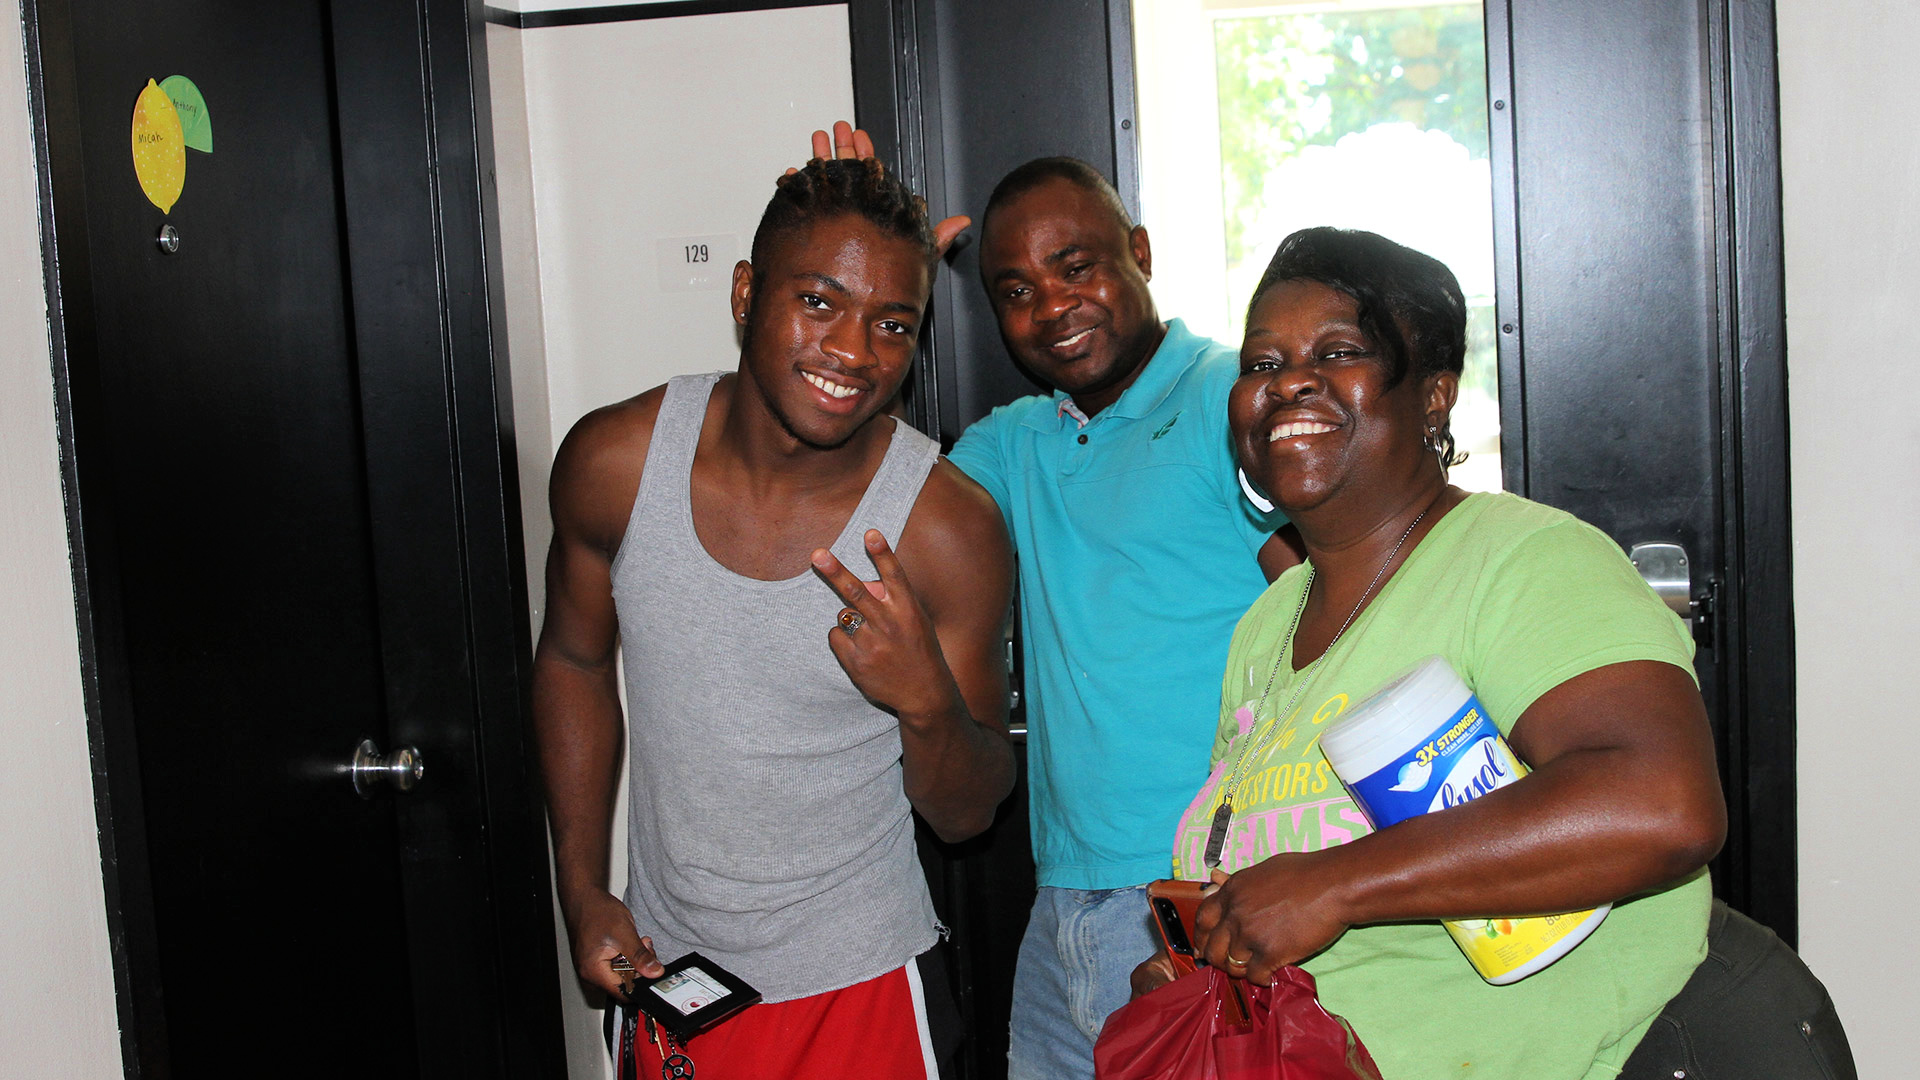 A new student takes a group photo with two smiling friends and family members as they set up the student's new room.